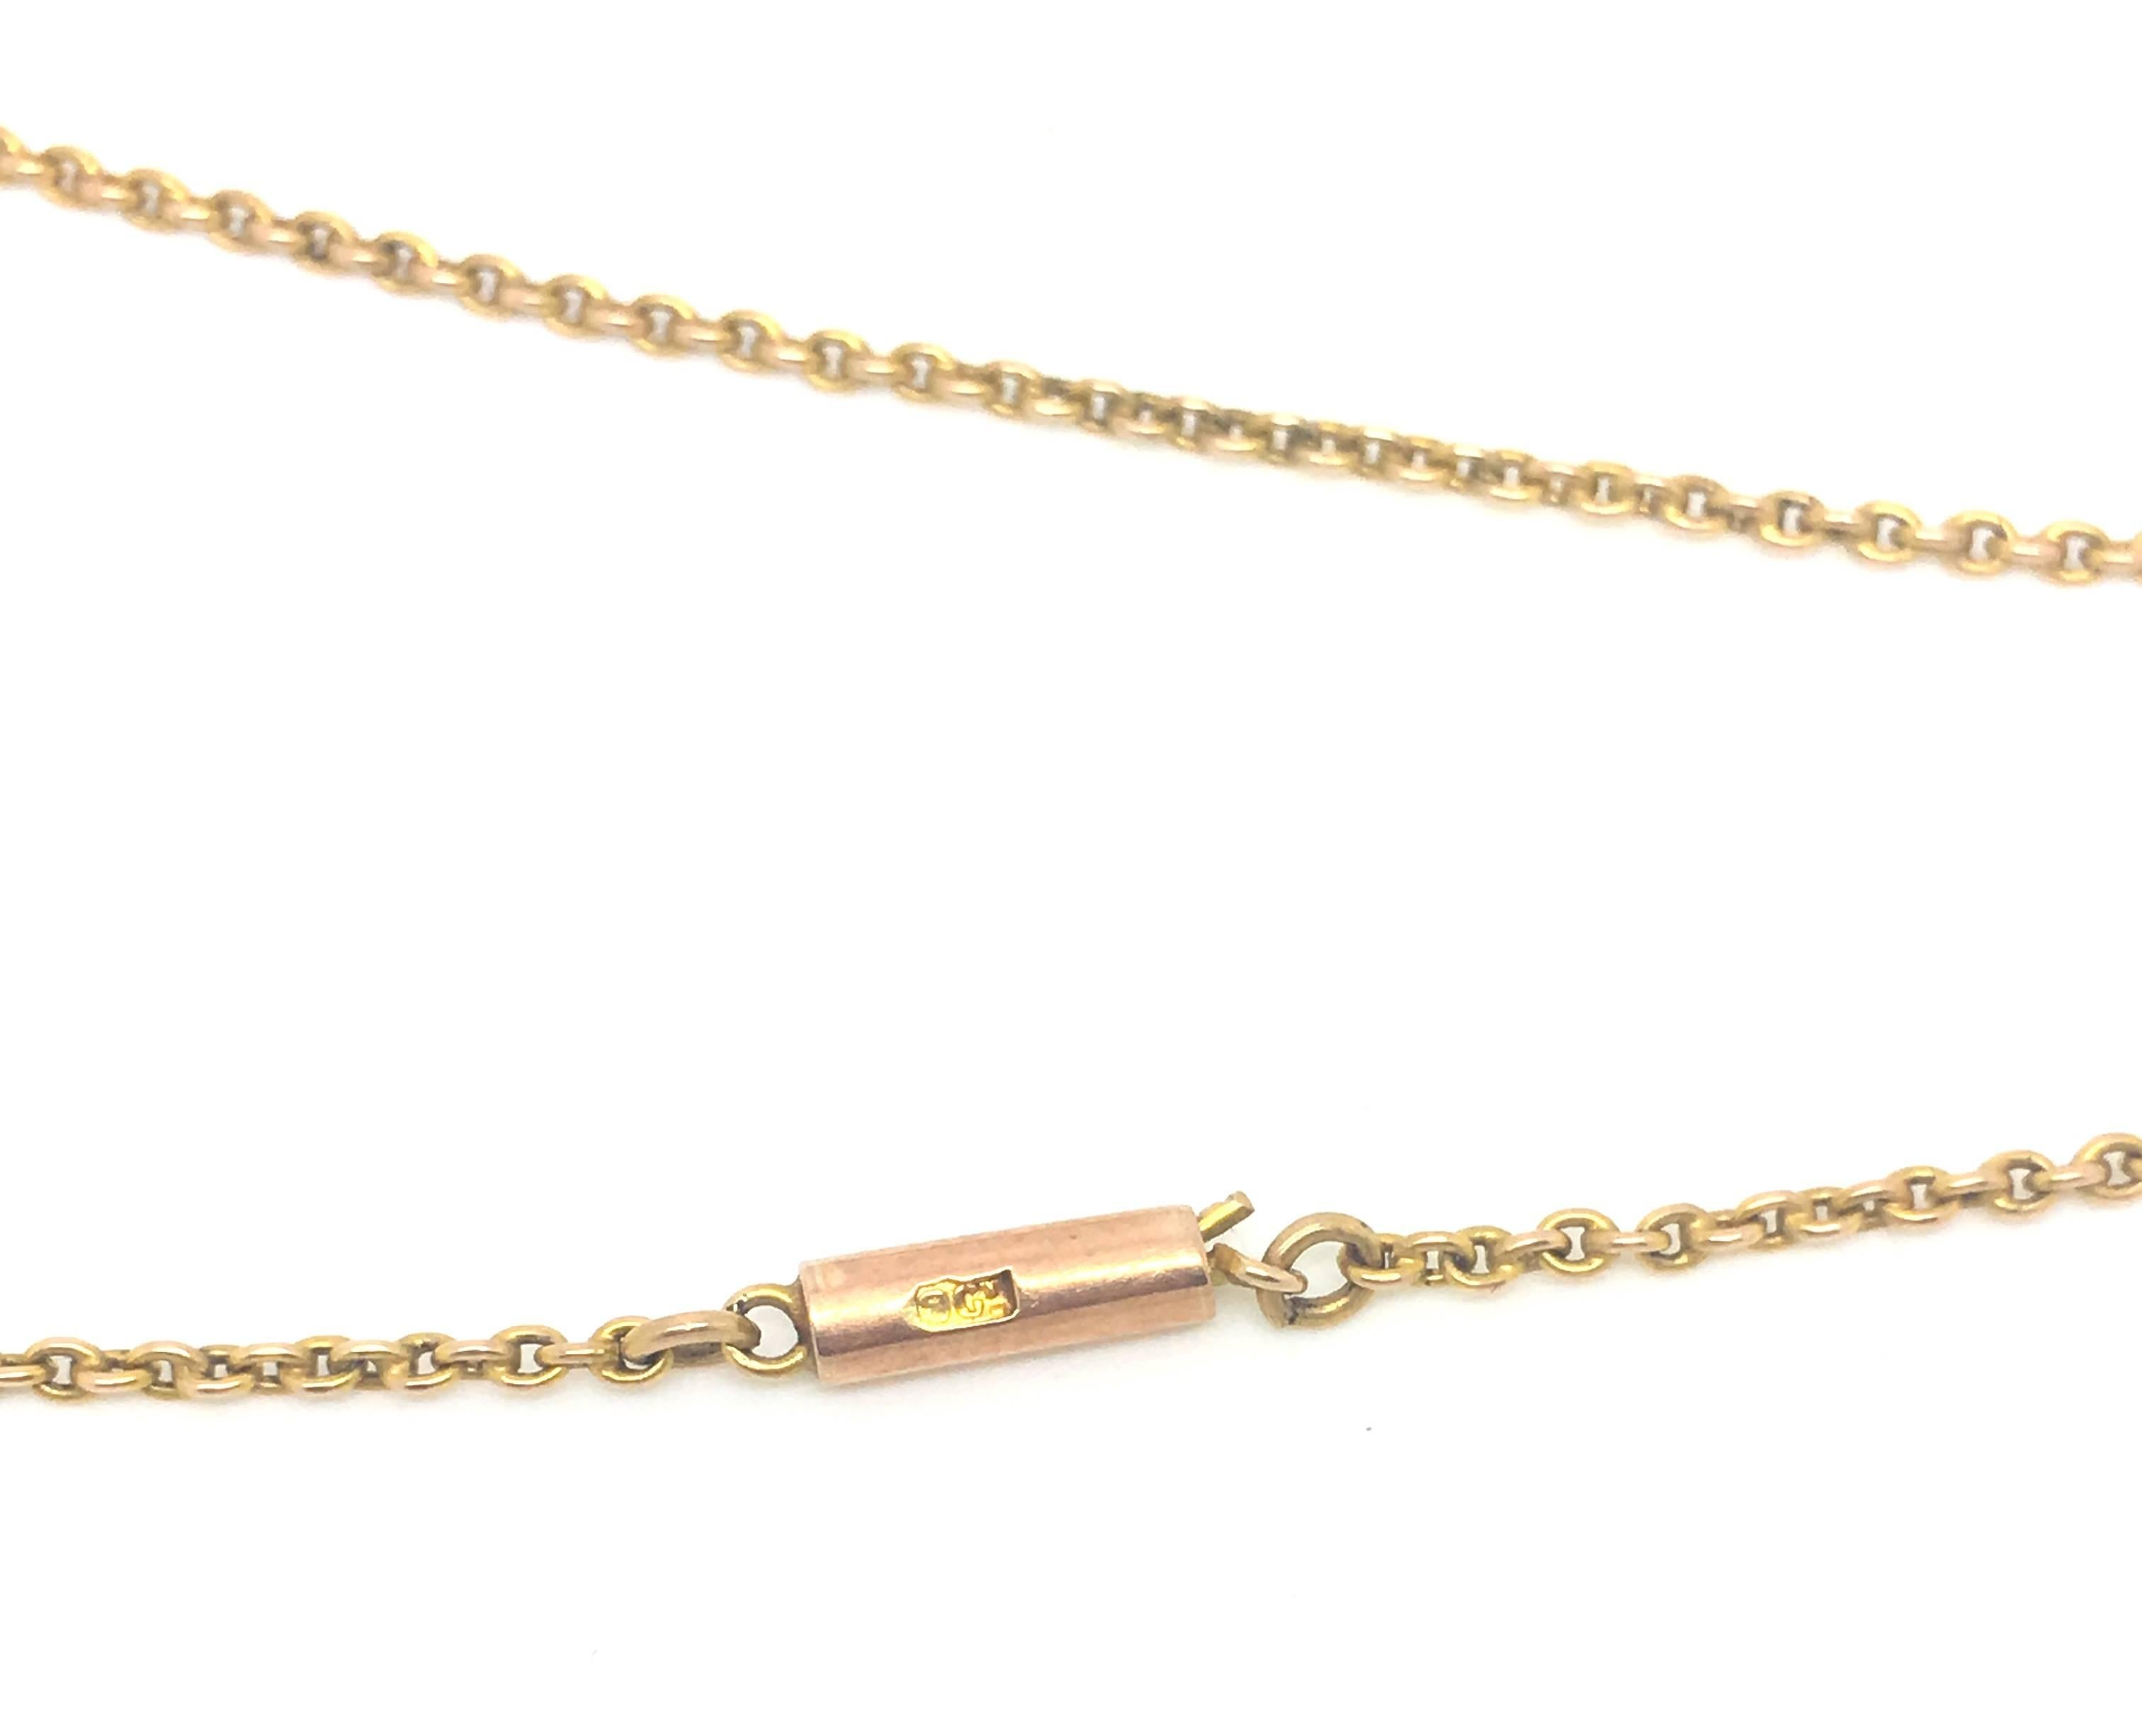 Jequirity Bean Necklace in 9 Carat Gold, 1910 In Excellent Condition For Sale In Farnham, GB